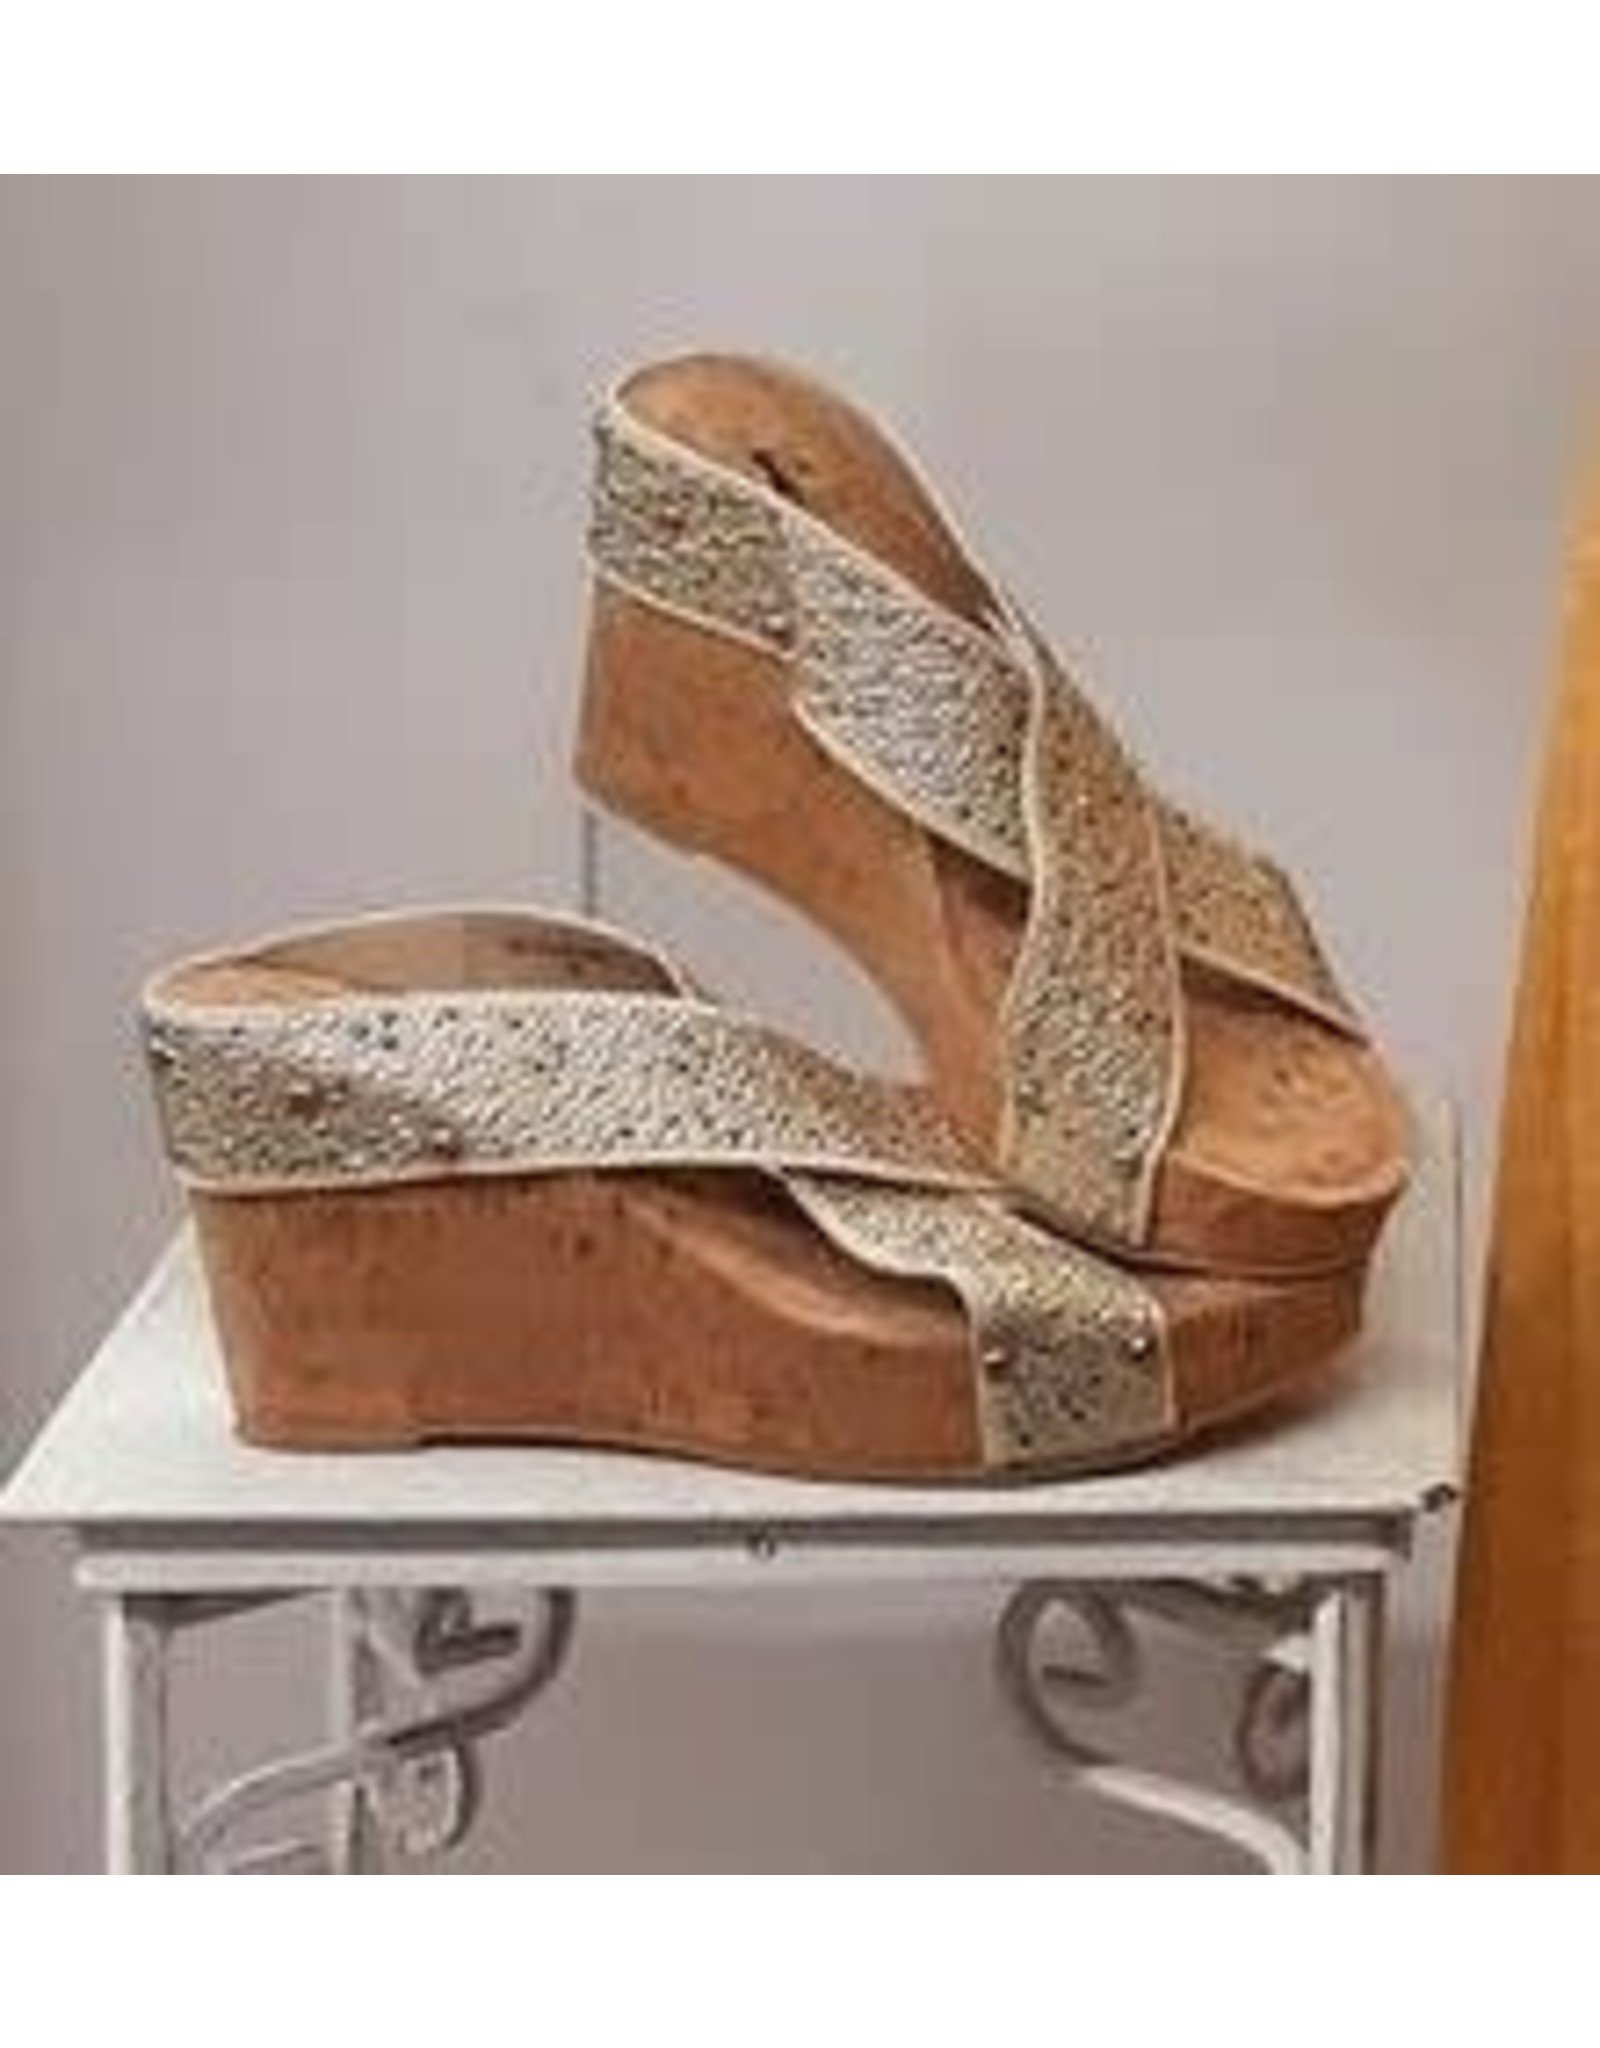 Corkys Silver Beaded Bamboo Wedges